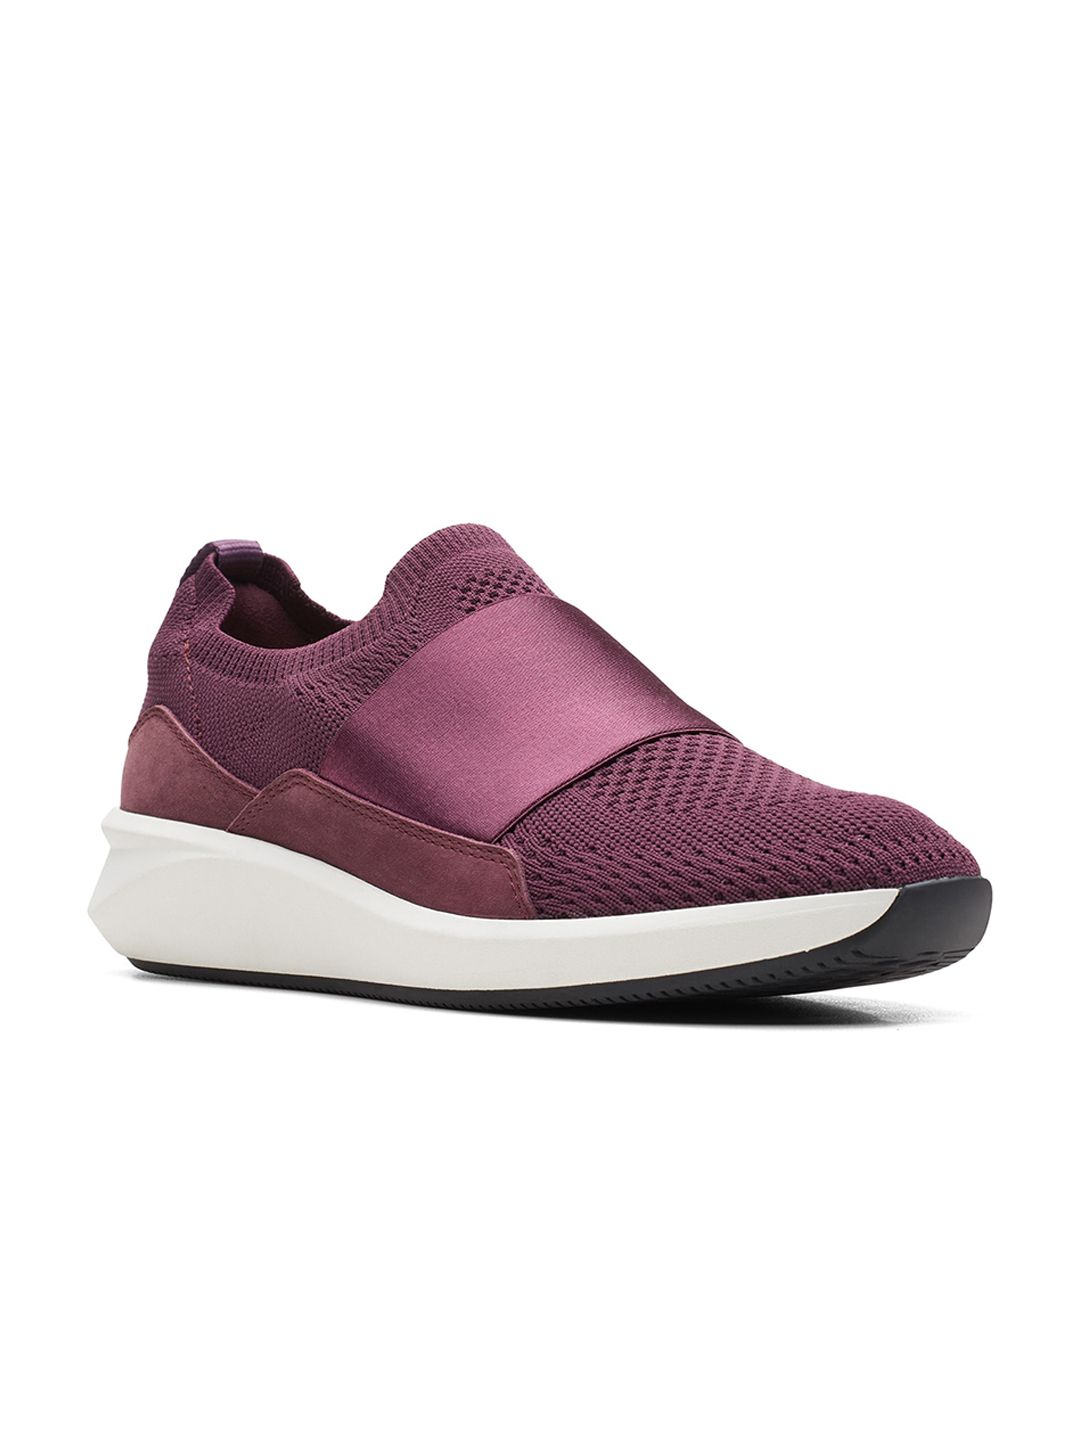 Clarks Women Red Textured Slip-On Sneakers Price in India